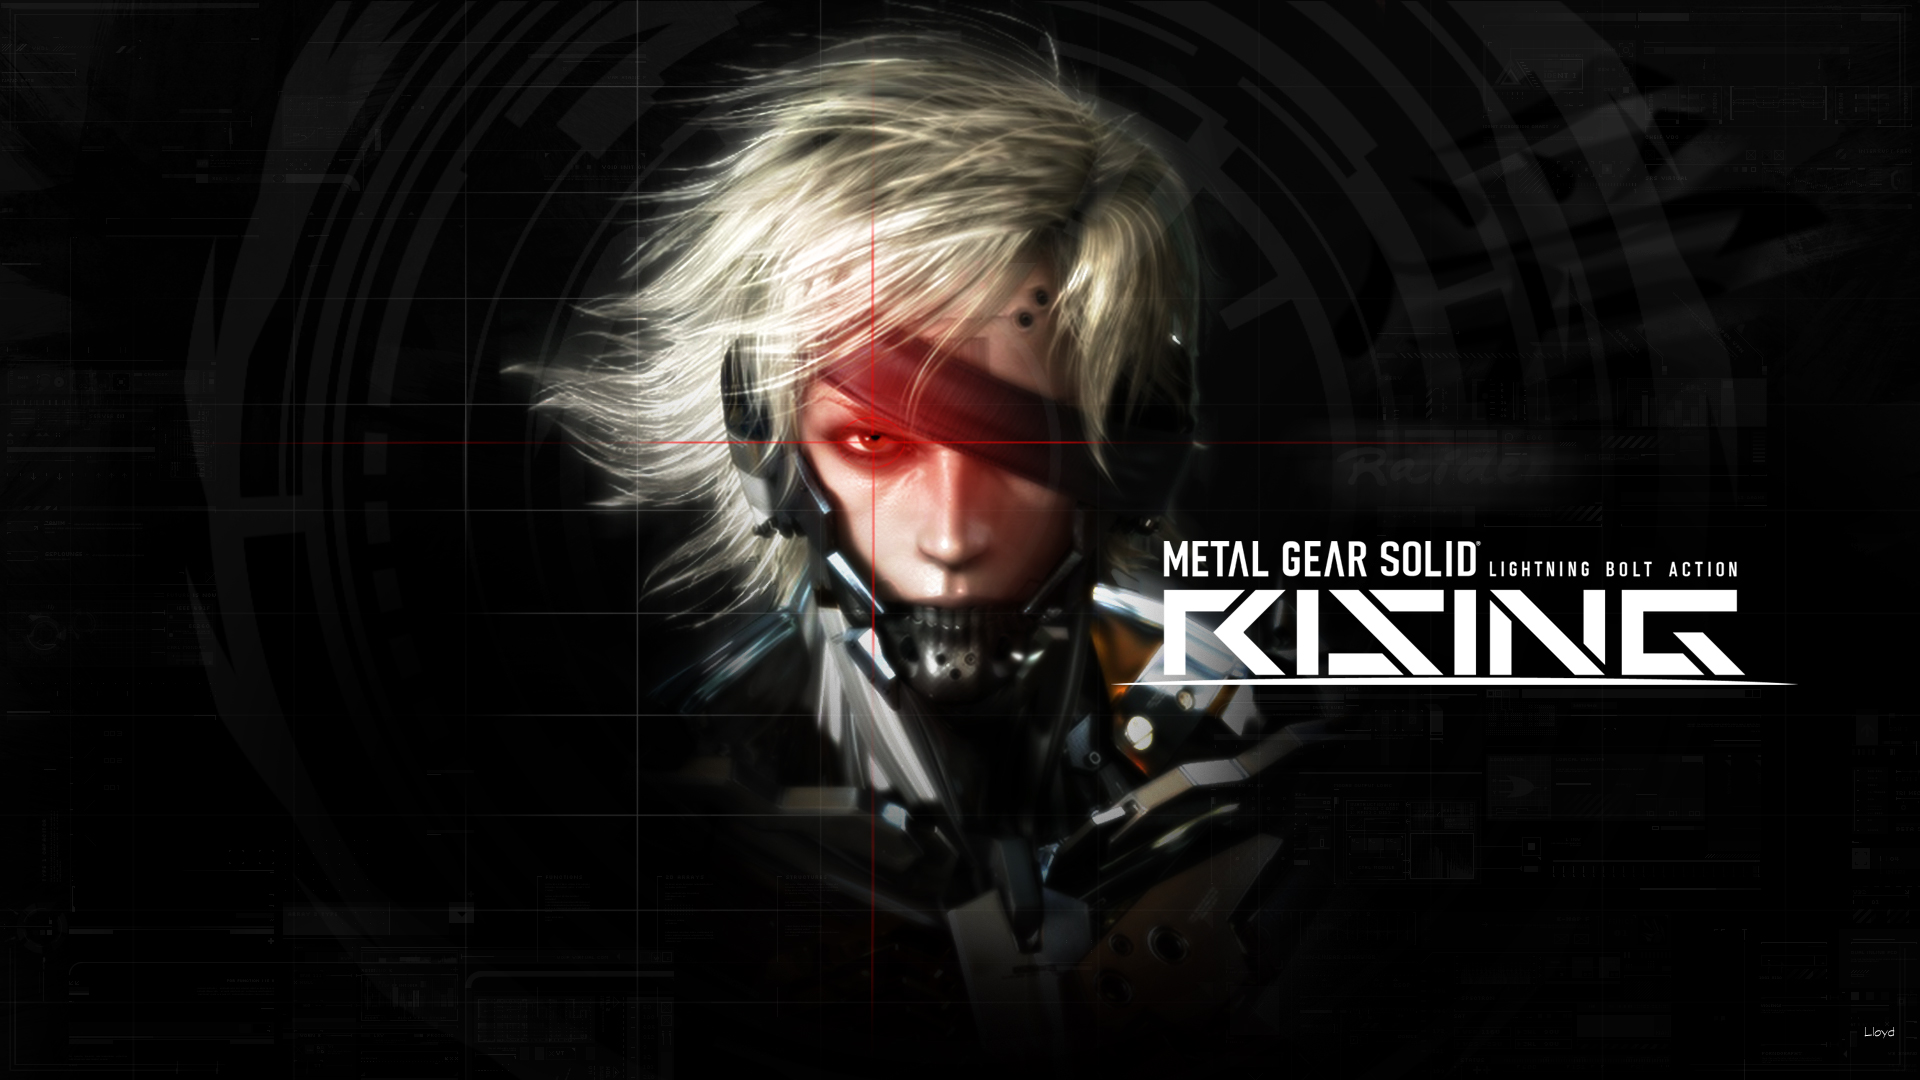 metal gear solid rising wp by igotgame1075 fan art wallpaper games